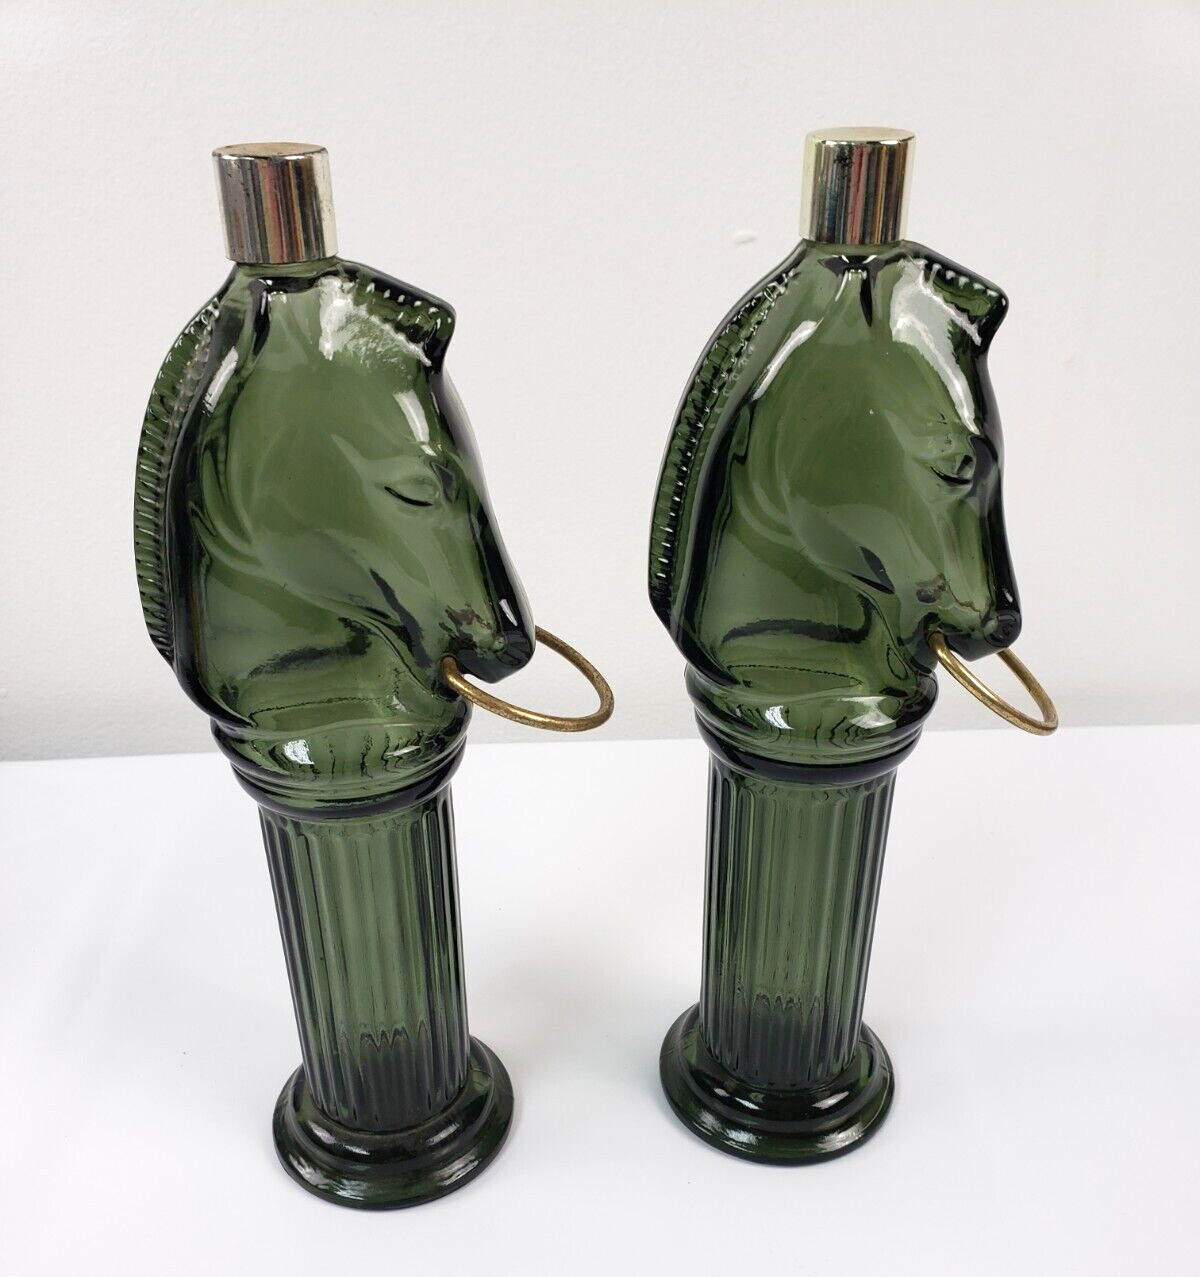 Vintage 1960s Avon Pony Post Decanter After Shave Green Glass Empty Bottle 9.5in